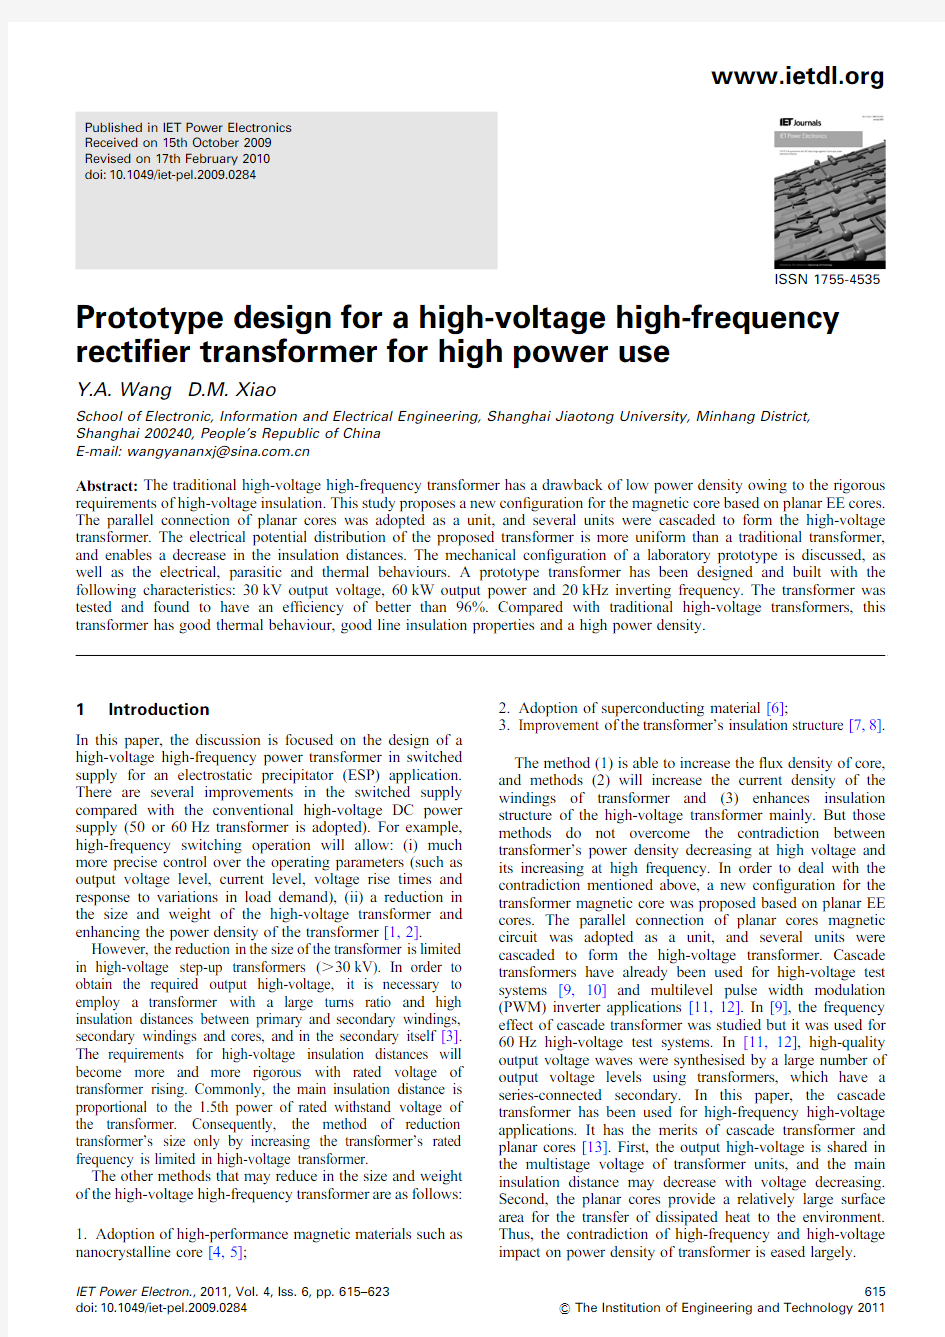 IET：Prototype design for a high-voltage high-frequency rectifier transformer for high power use